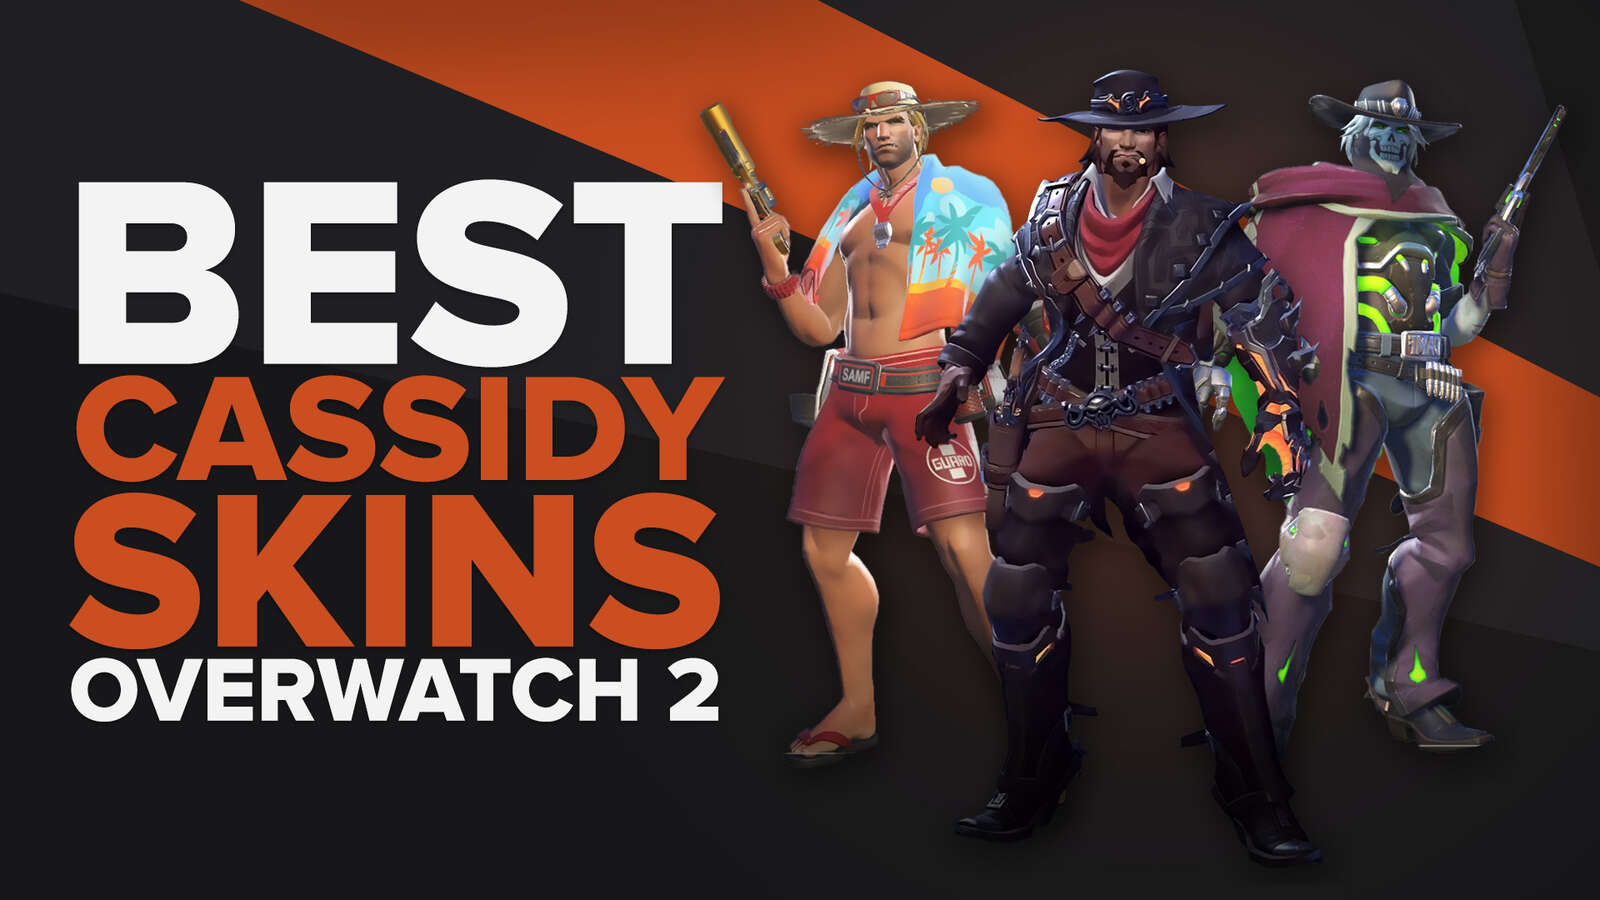 10 Best Cassidy Skins Ever Released in Overwatch